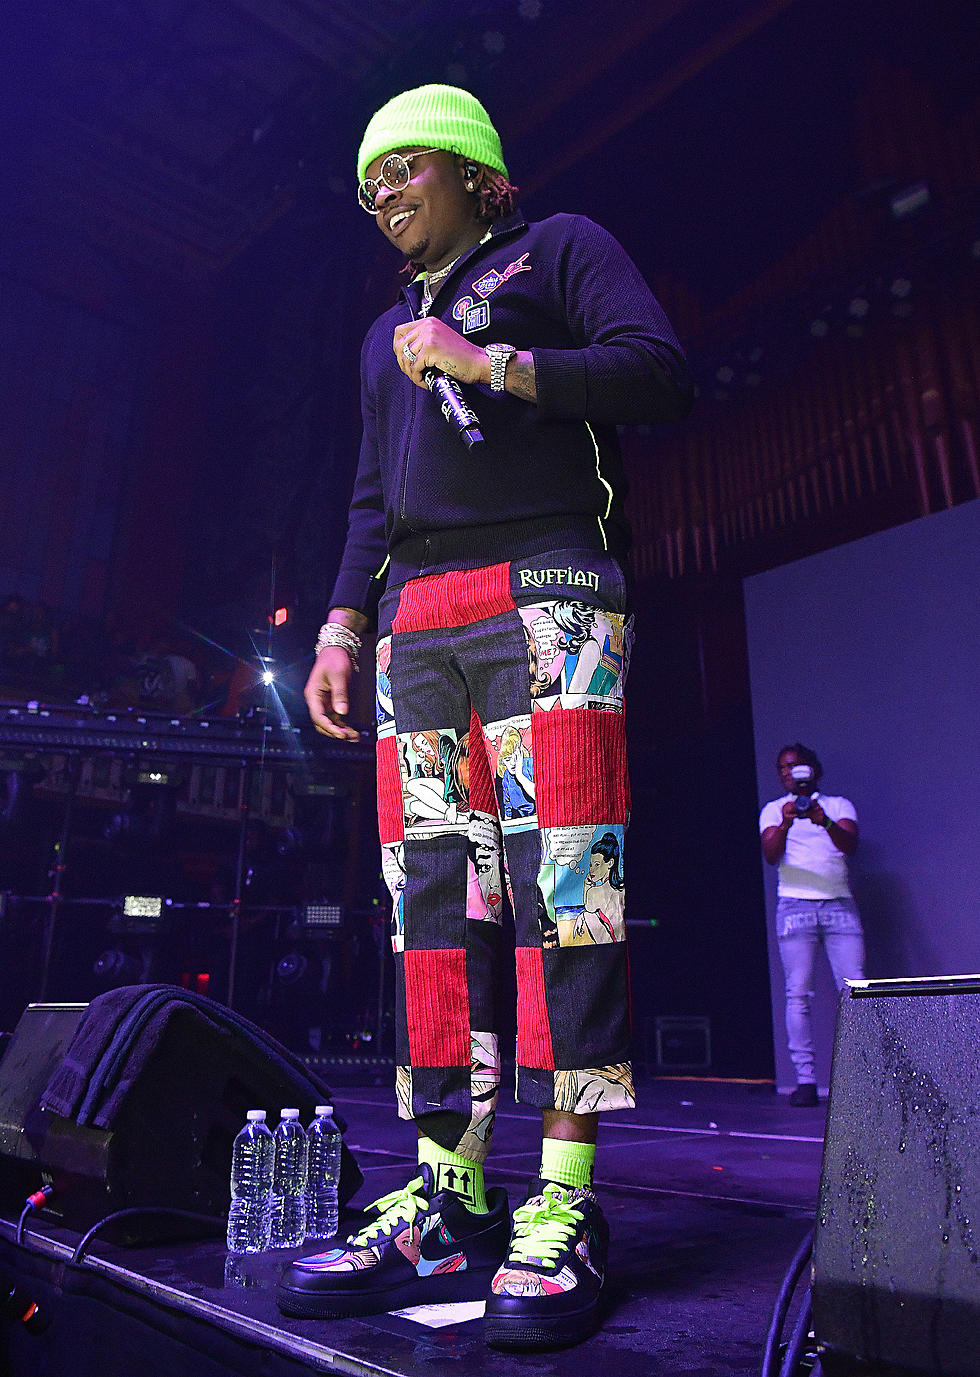 Gunna - private island, A COLORS SHOW: Clothes, Outfits, Brands, Style and  Looks